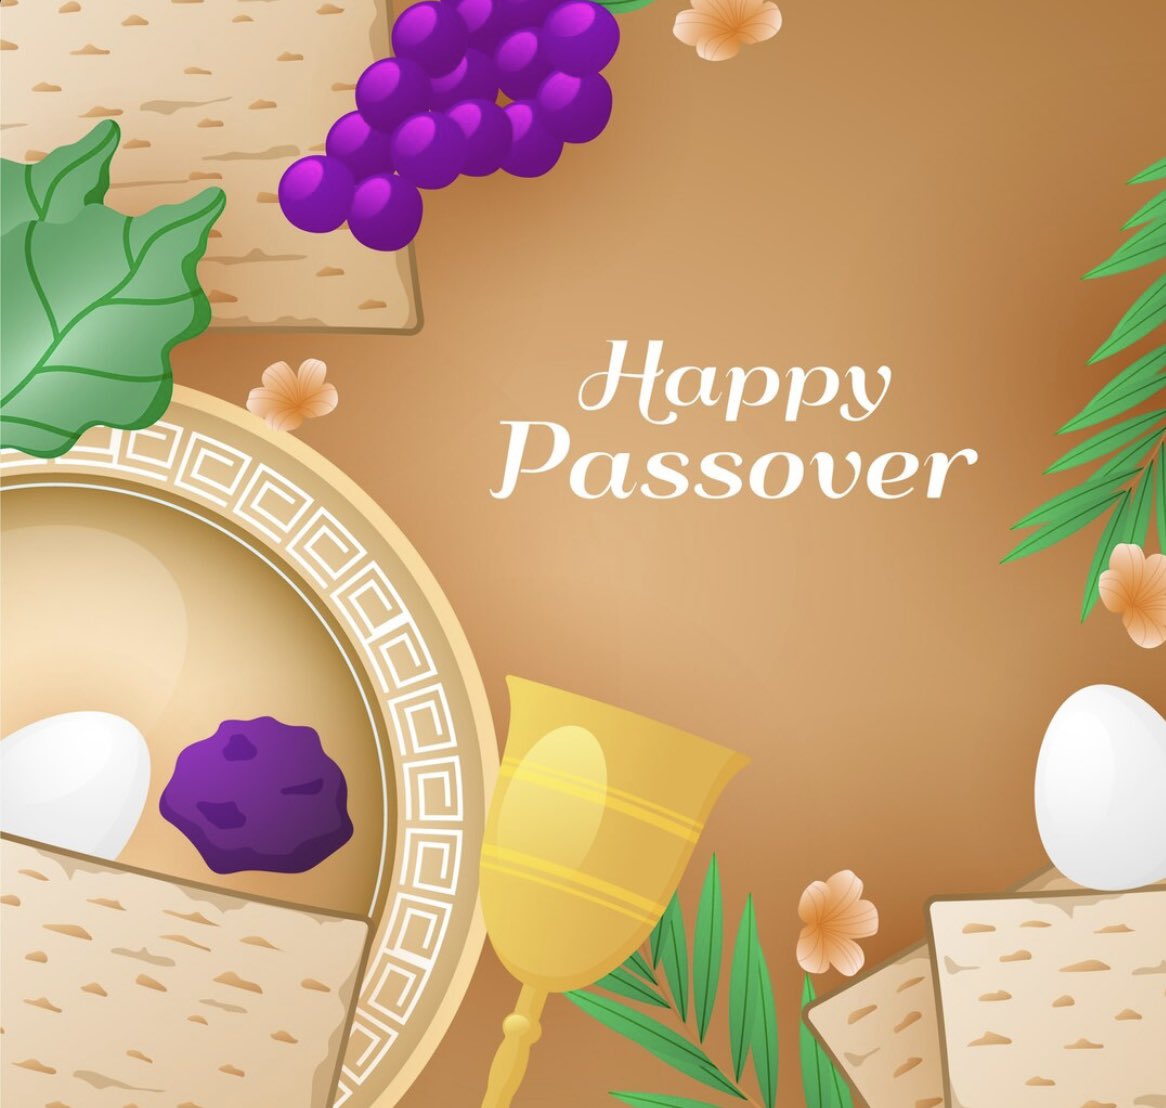 #lapd wishing our community a happy and safe holiday. May this festival of freedom bring joy, peace, and blessings to you and your loved ones. #Passover @LAPDRuby @LAPDHQ